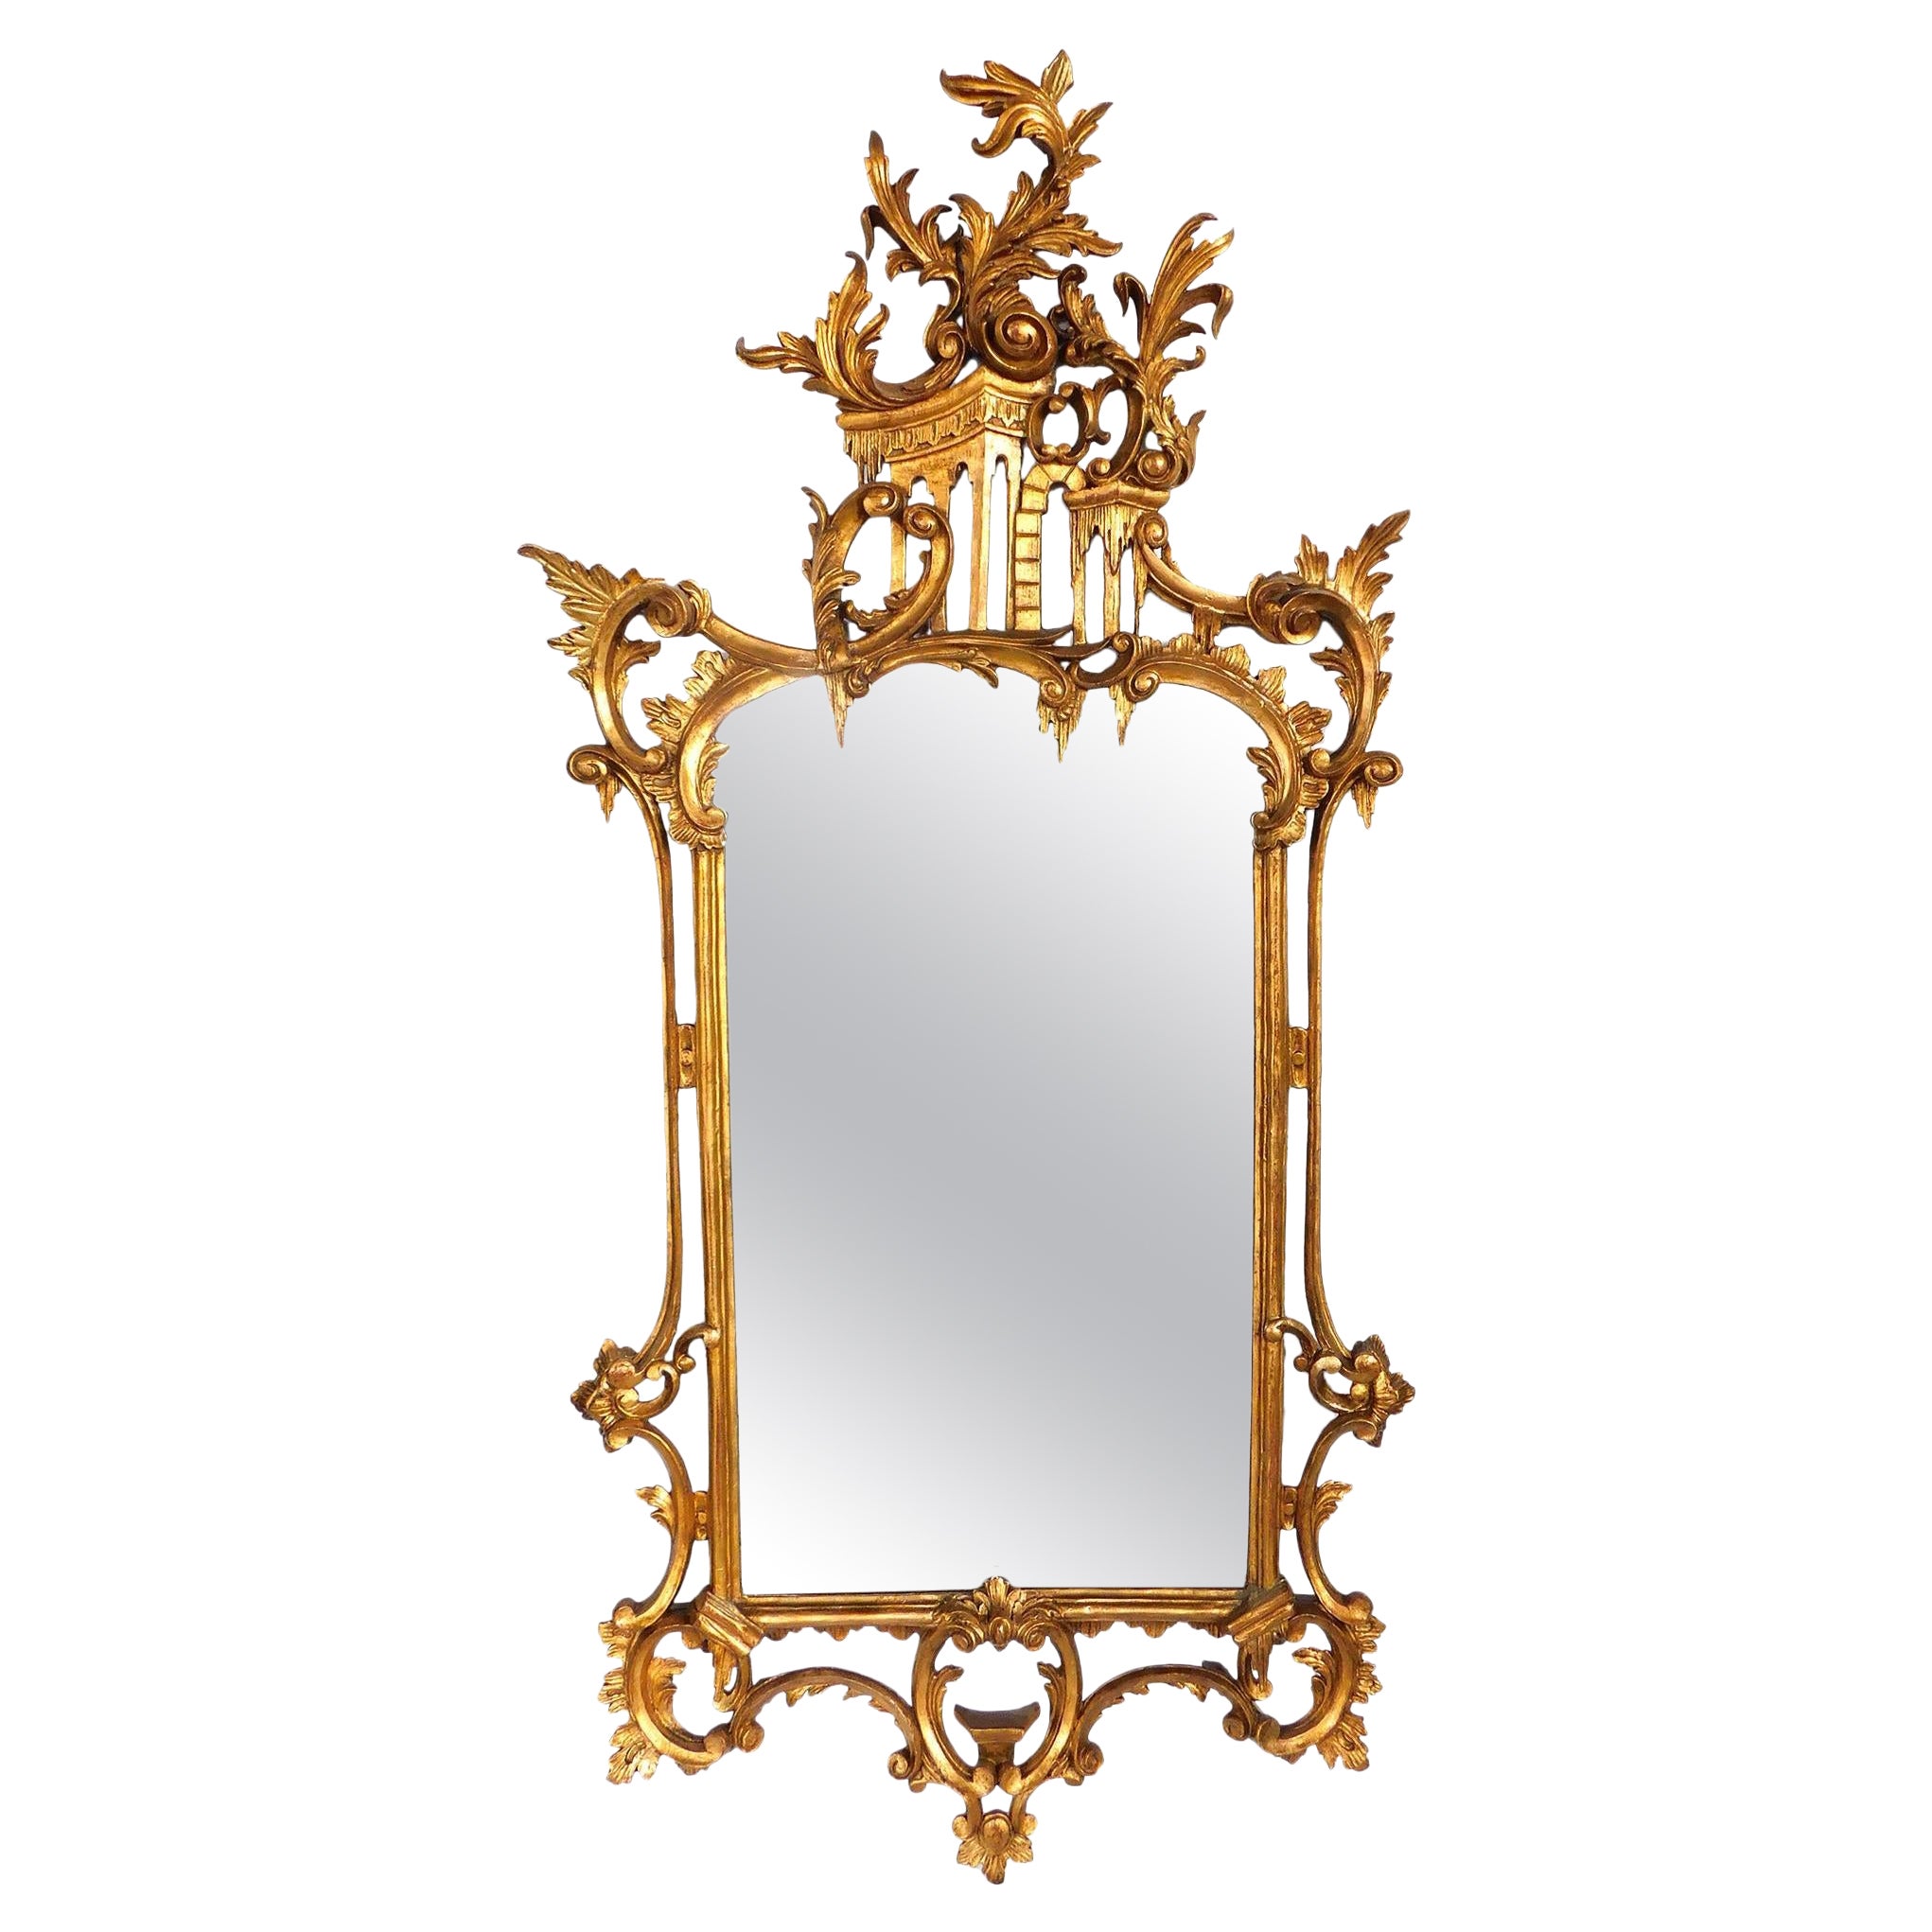 Well-Carved English Chippendale Style Gilt-Wood Mirror with Bold Crest For Sale